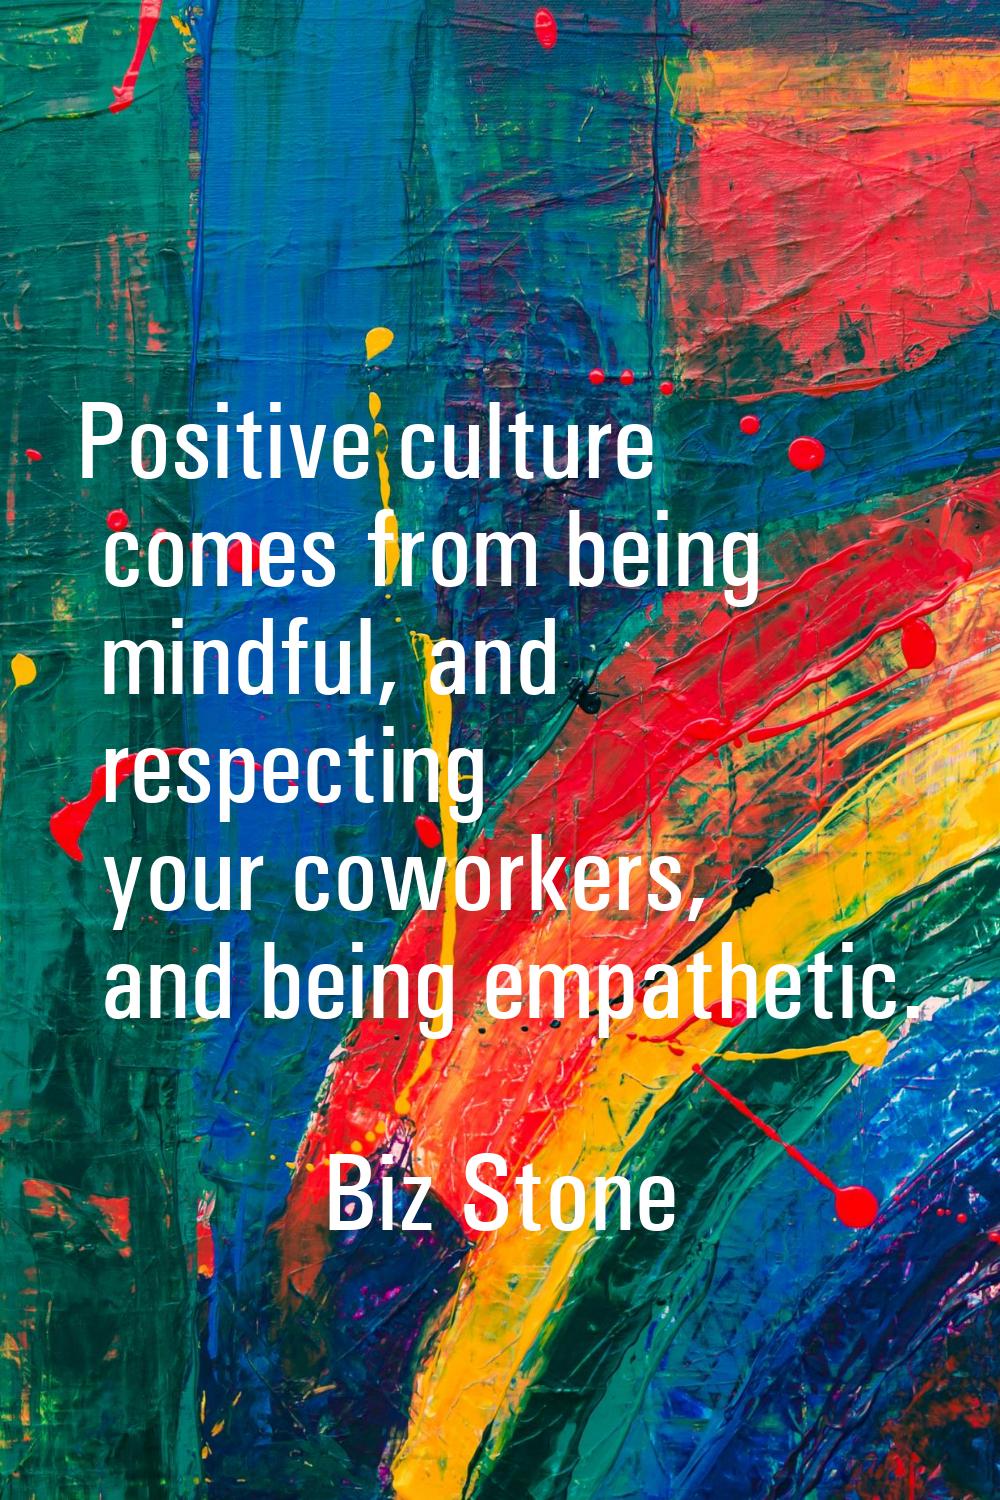 Positive culture comes from being mindful, and respecting your coworkers, and being empathetic.